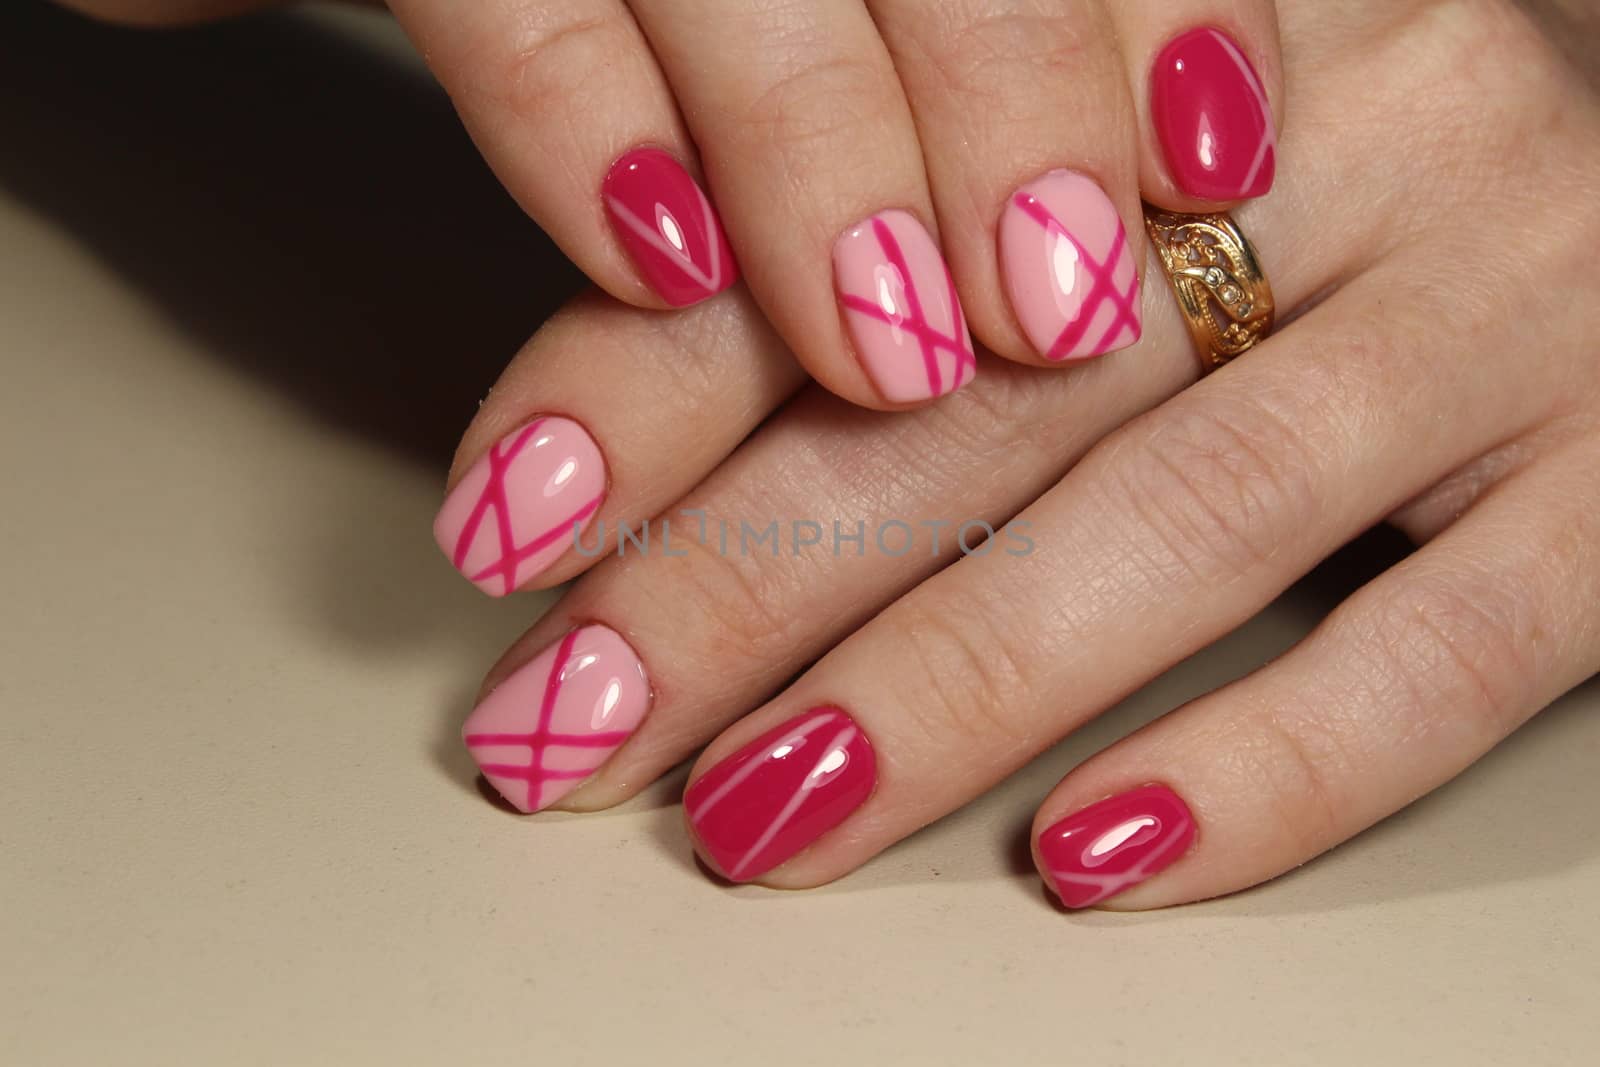 Design manicure nails with pink nail polish.